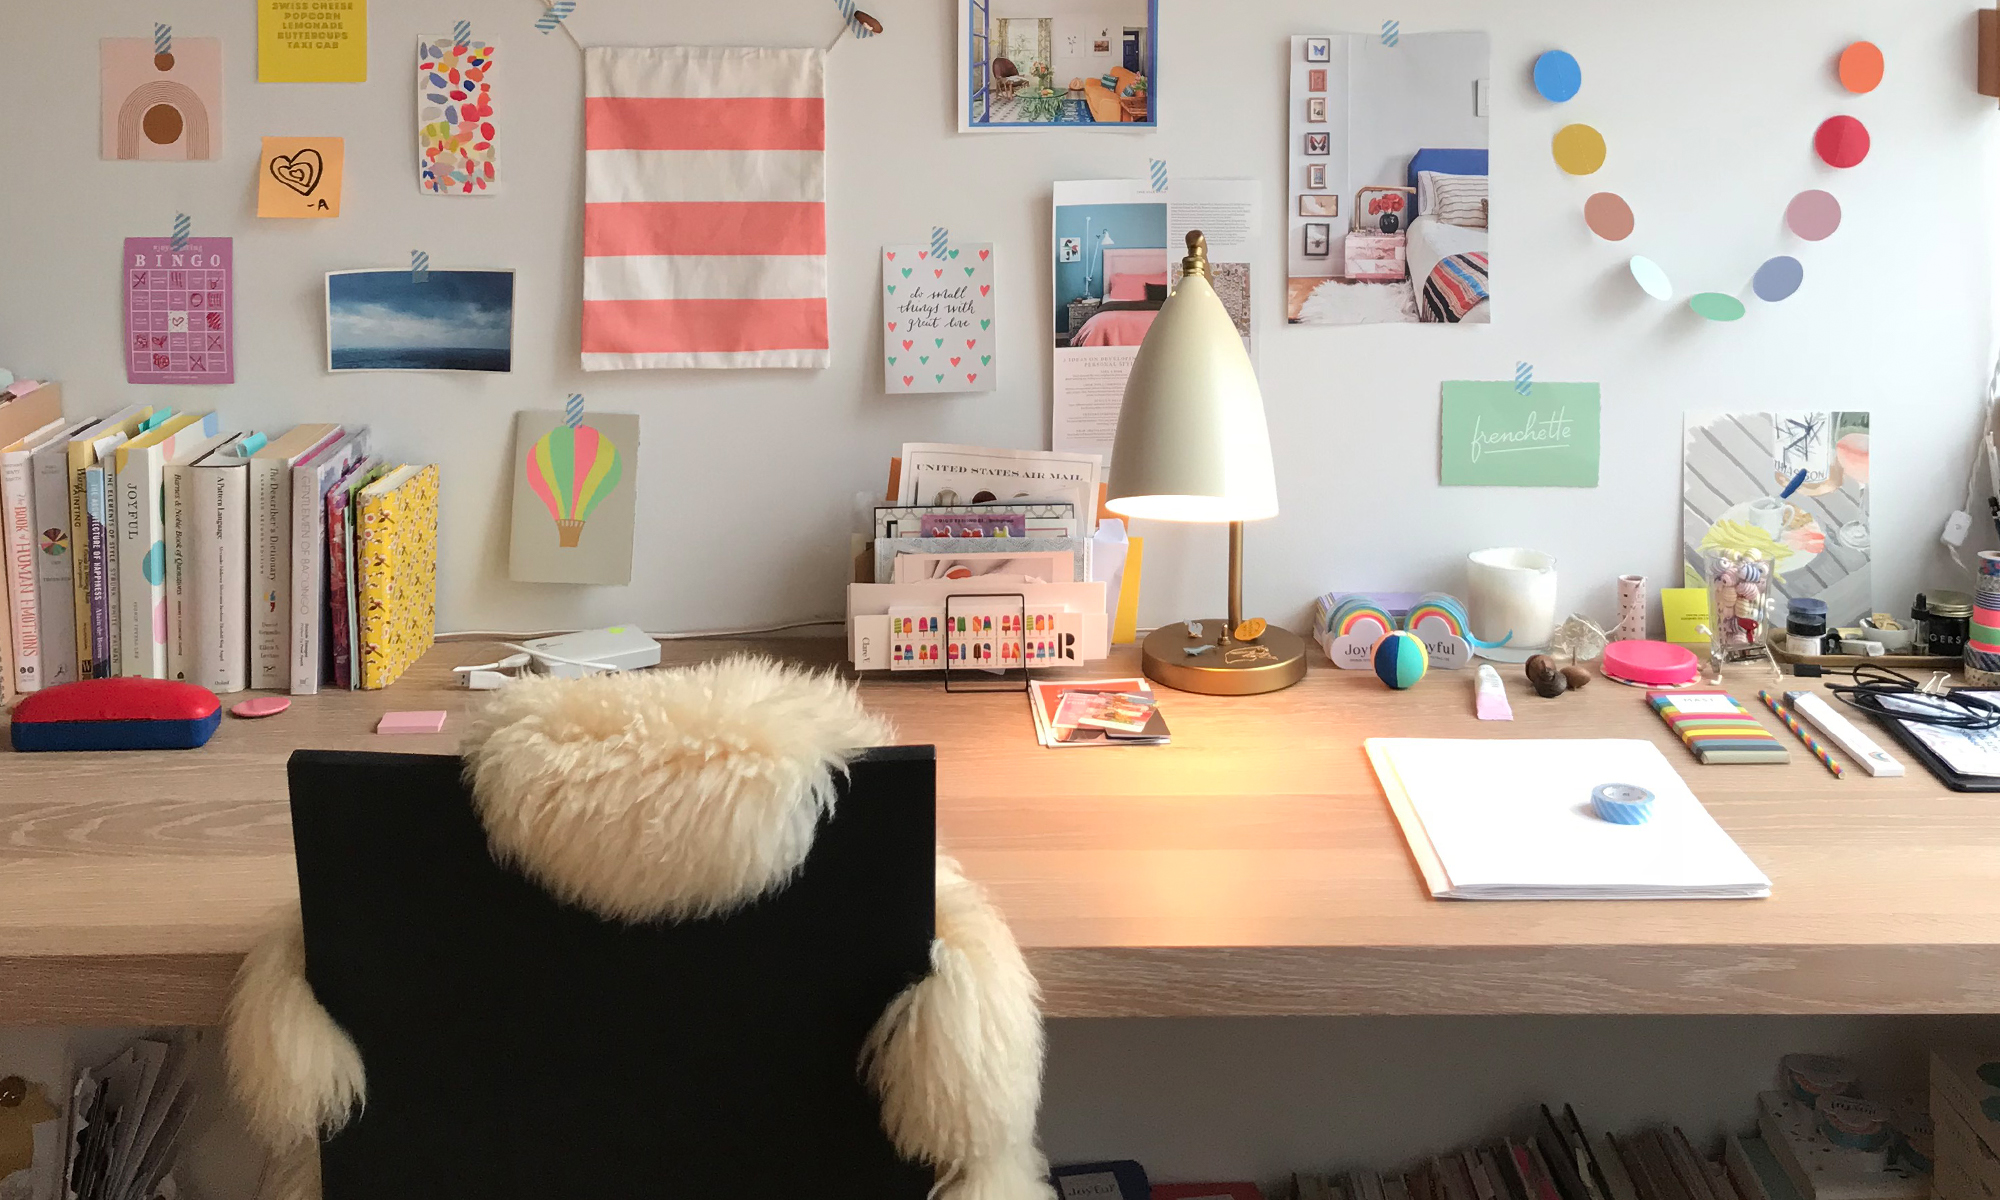 10 Useful Items to Have If You're Working From Home